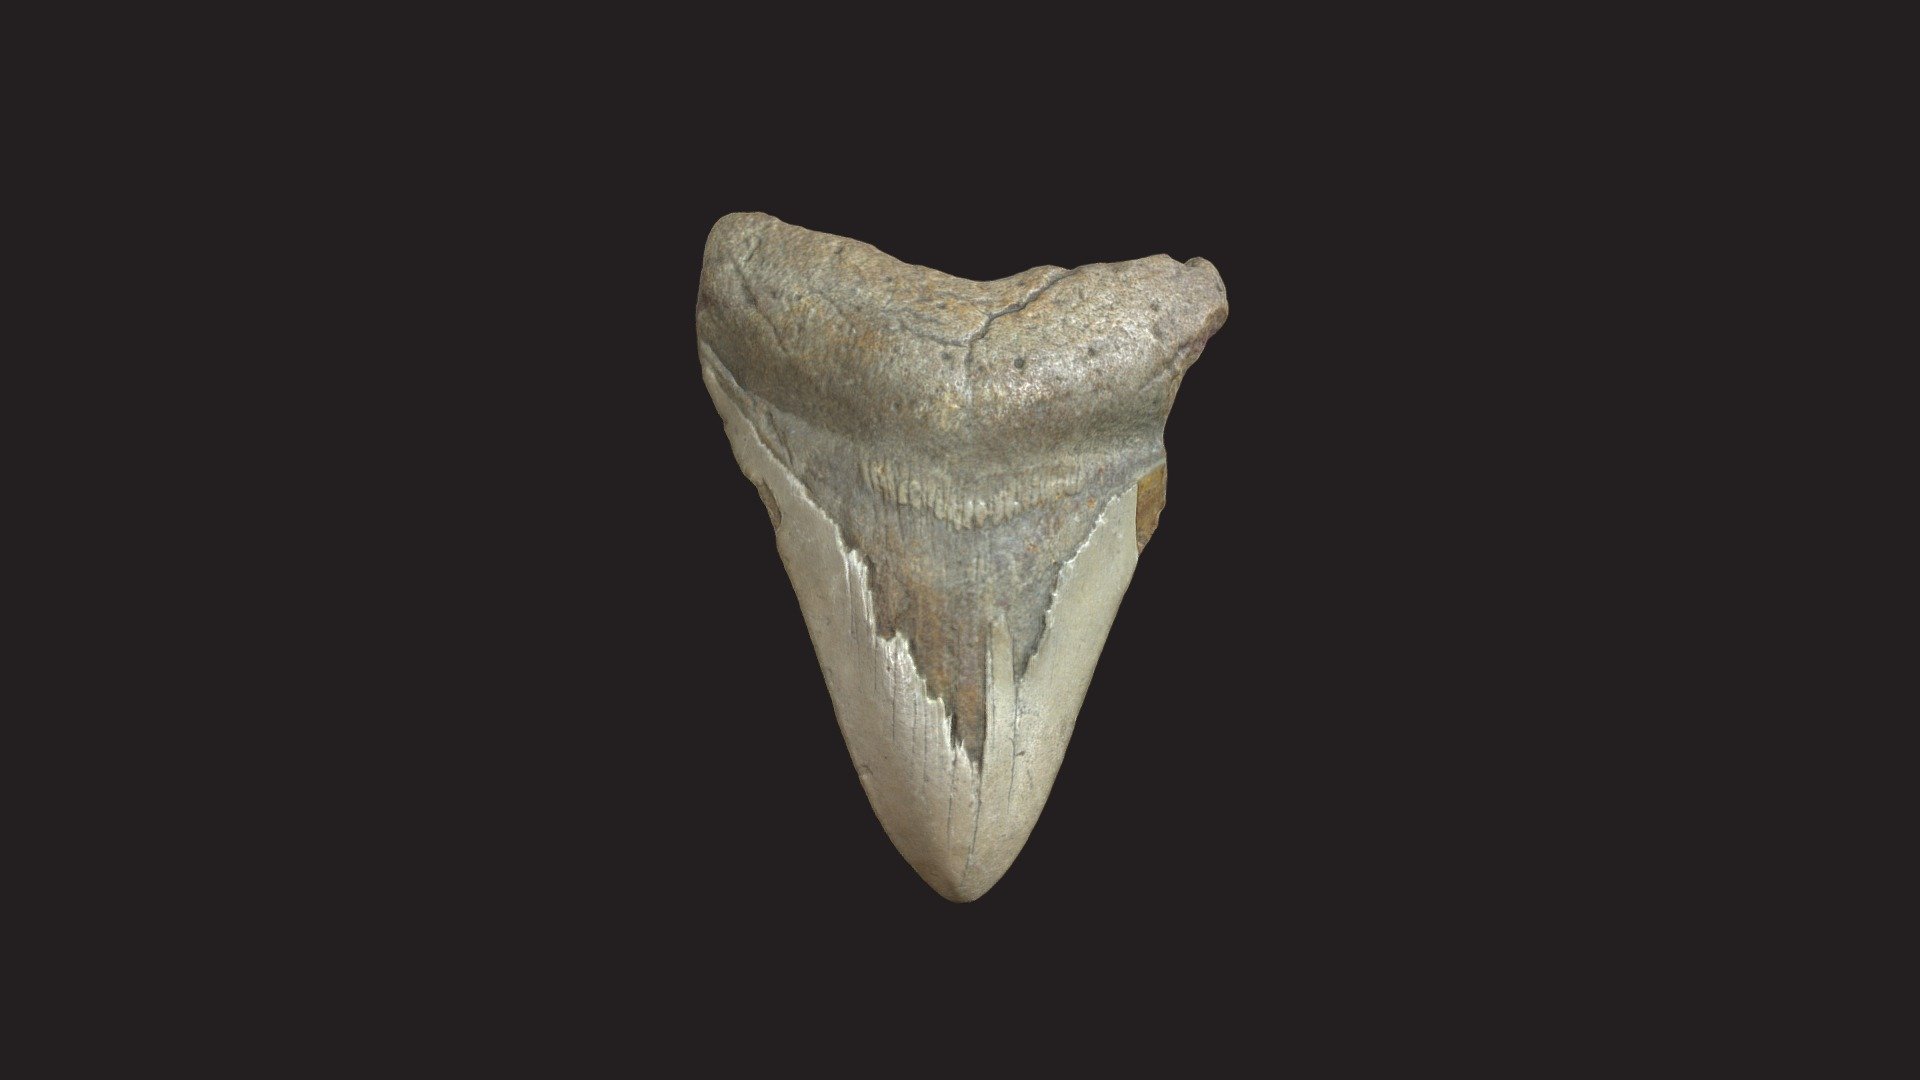 CMNH 10050, Otodus megalodon (Agassiz, 1843)

Age: Eocene  Rock unit: Phosphate beds

Locality: Charleston Co., South Carolina

Collector: J. E. Hyde

Scanner: Artec Spider

Image by Kevin Dang, CMNH - CMNH 10050, Megalodon tooth - 3D model by Cleveland Museum of Natural History (@CMNH) 3d model